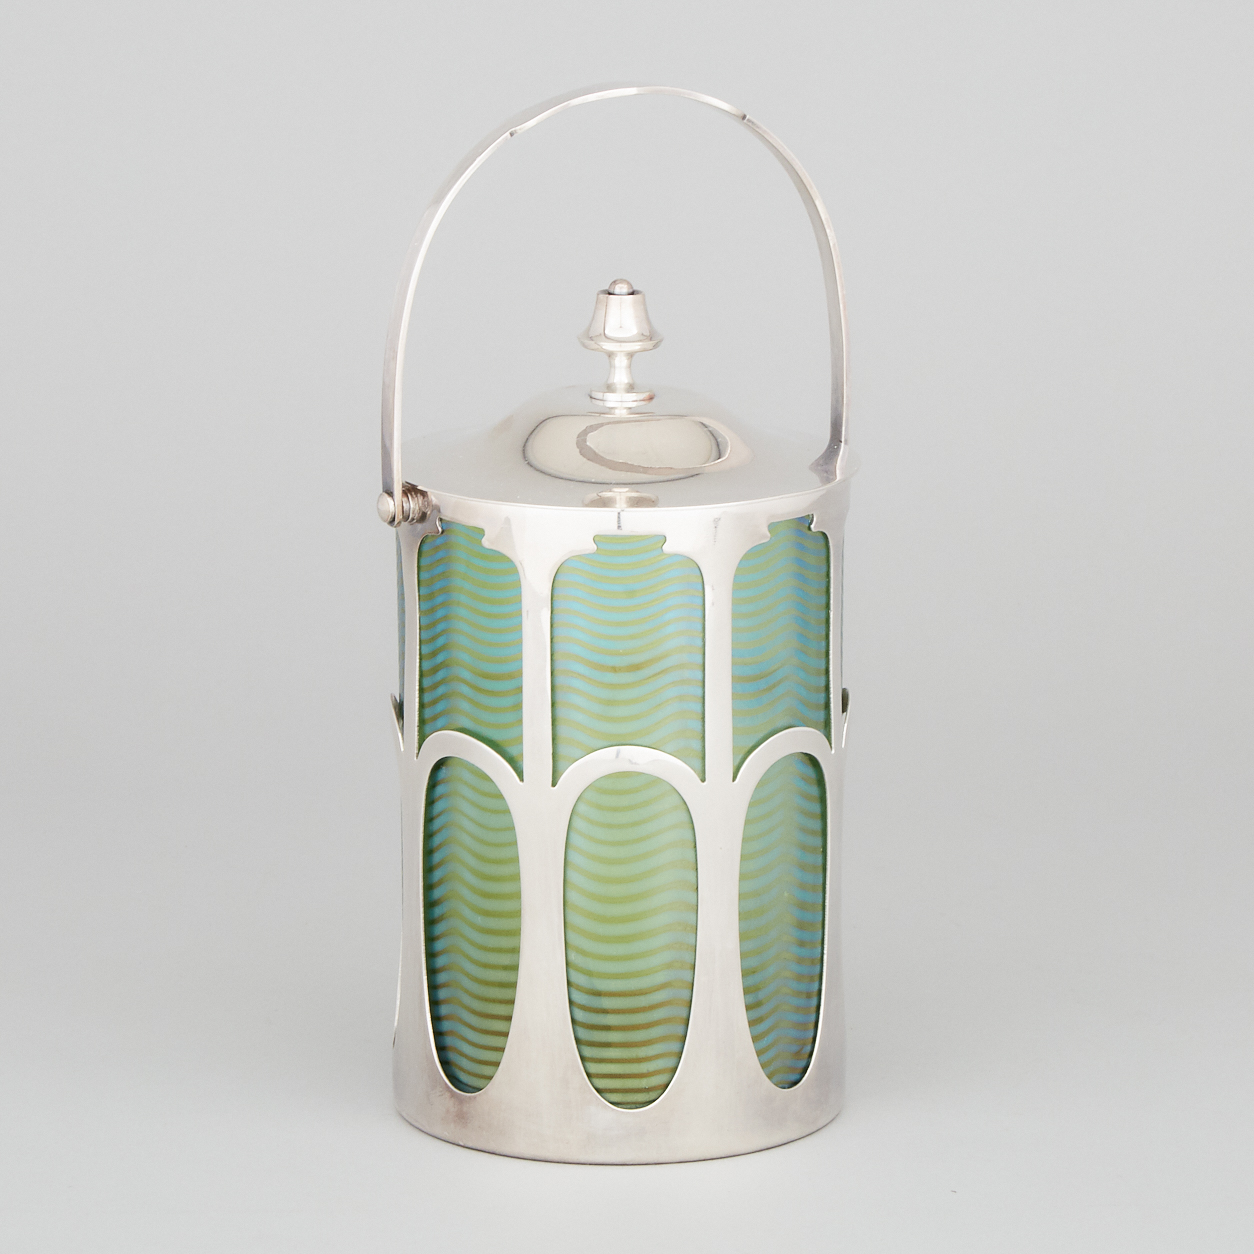 Bohemian Iridescent Glass and Silver Plate Mounted Biscuit Jar, probably Loetz, c.1900